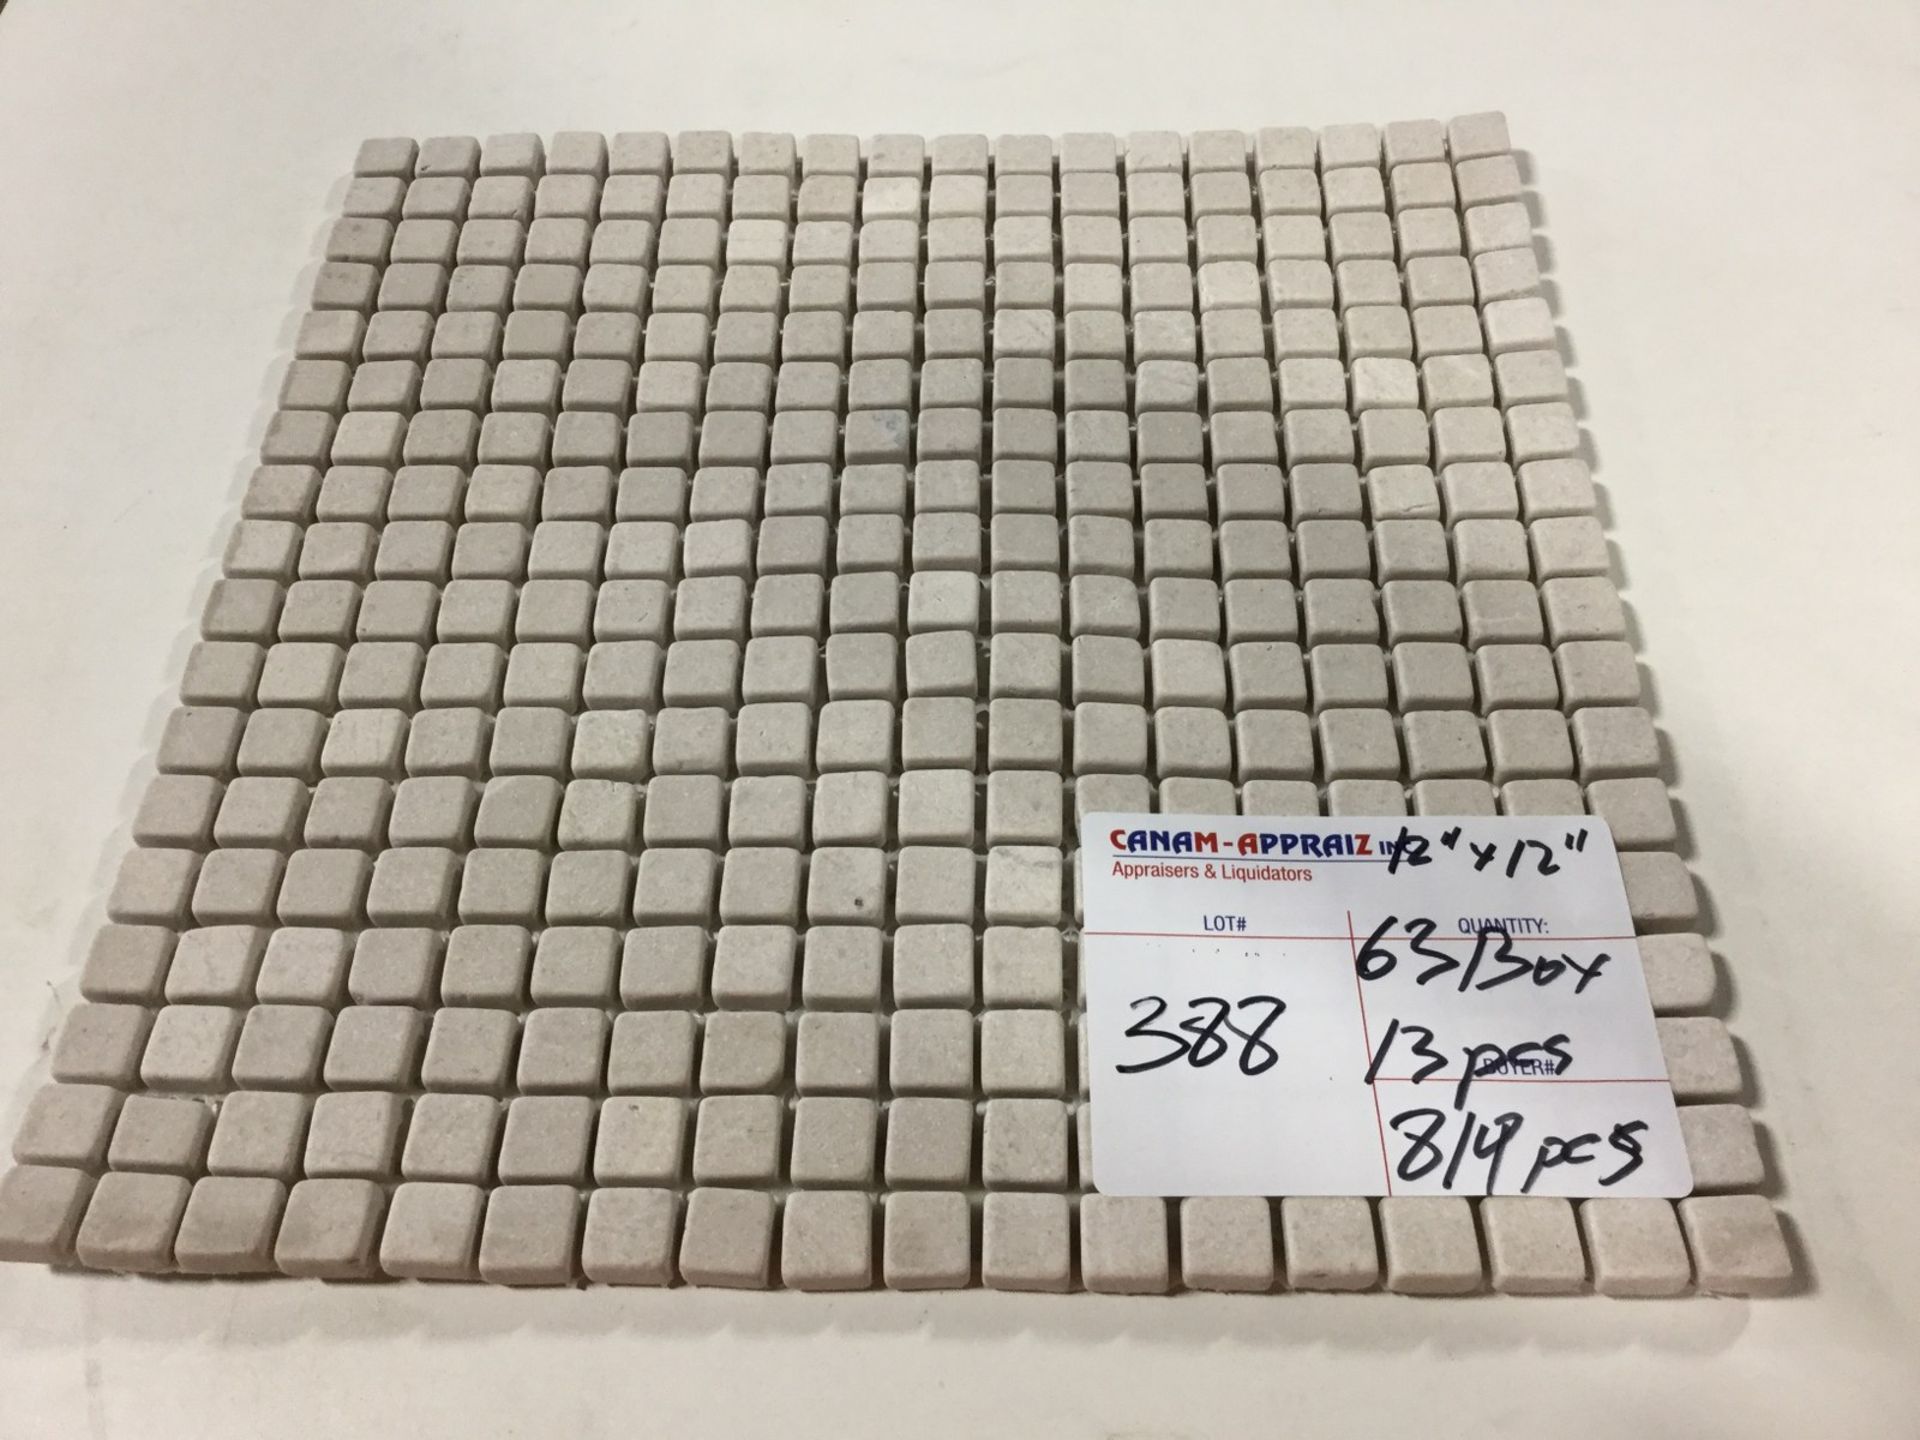 5/8"X5/8" IRANIAN HURZIN MARBLE HONED MOSAIC 819 PIECES OR SQ/FT, RETAIL $12.98 SQ/FT